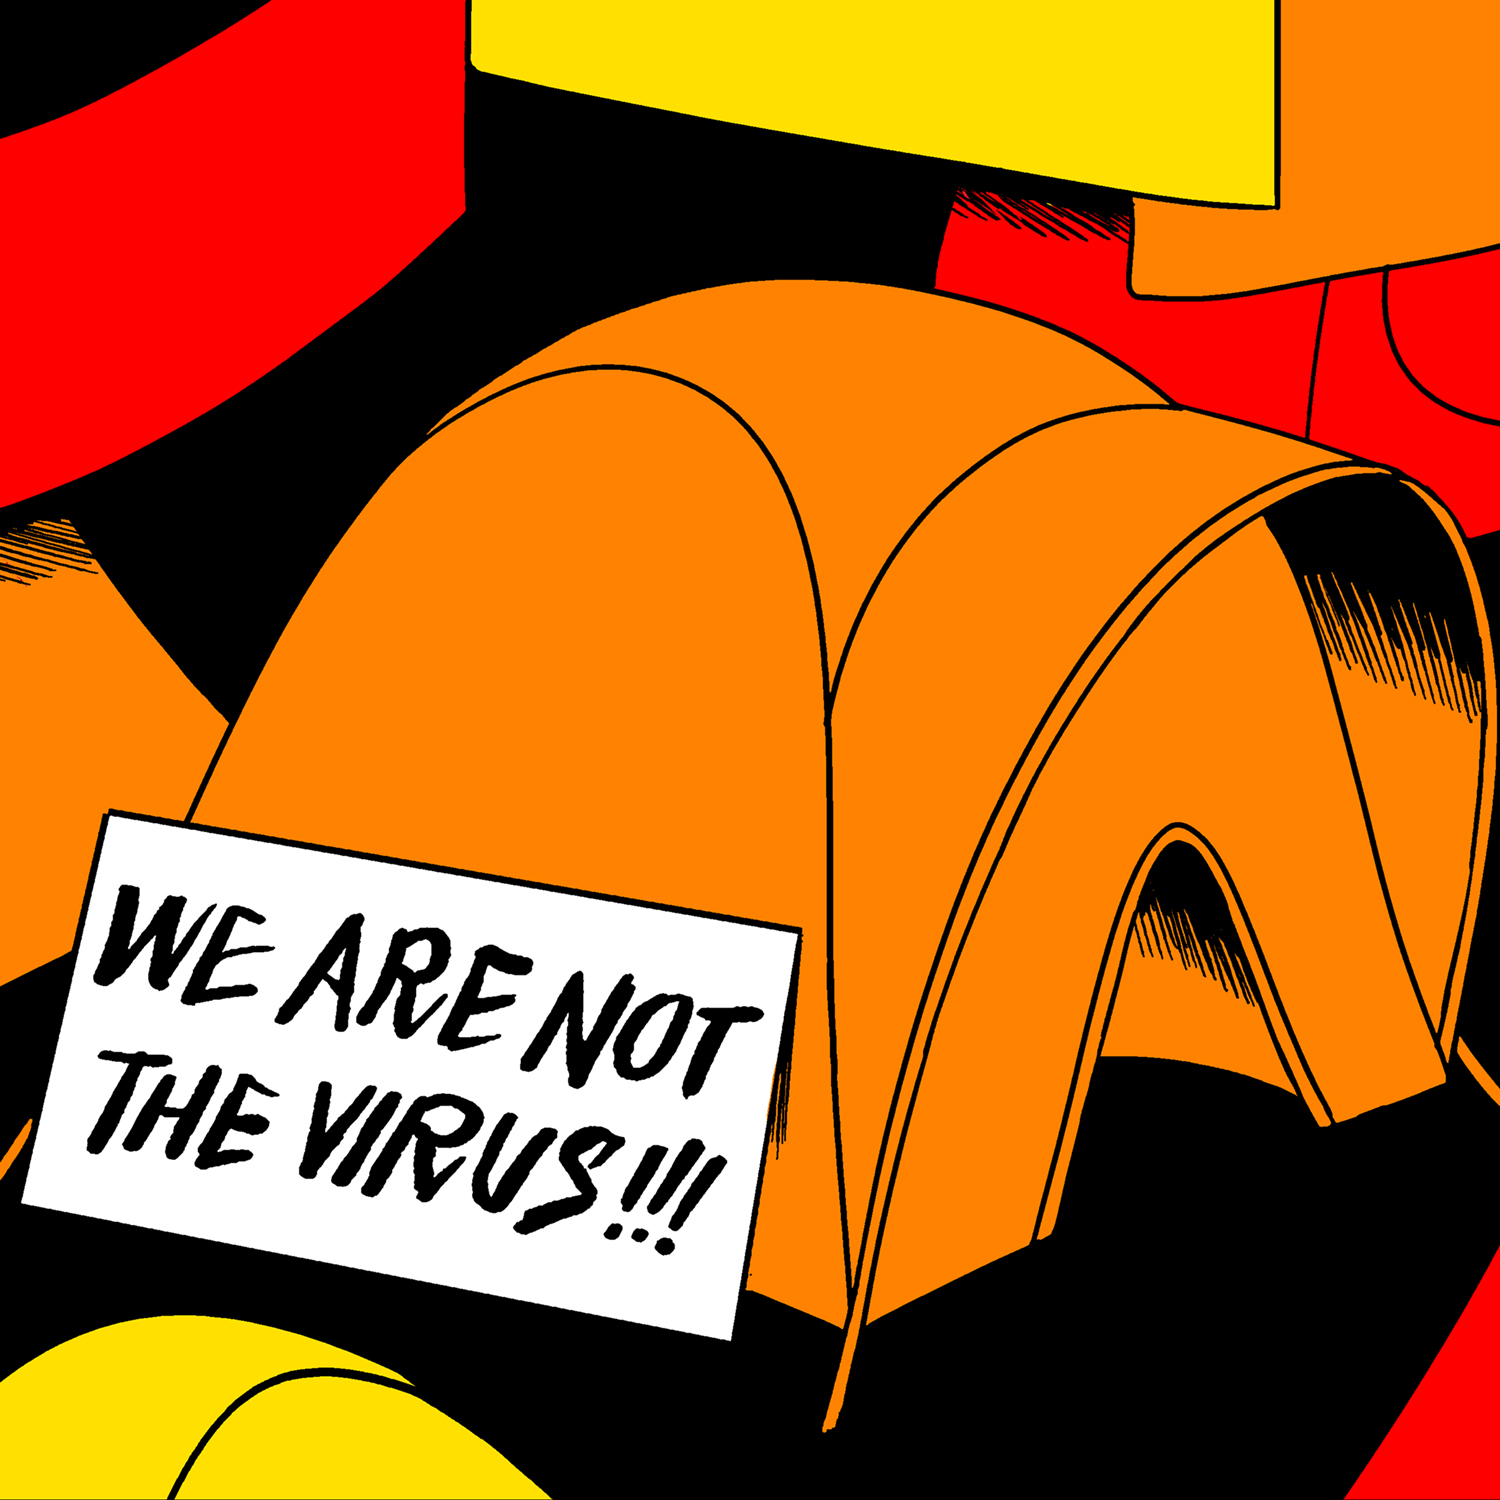 colorful illustration of tents and sing with "We are not the virus!" written on top